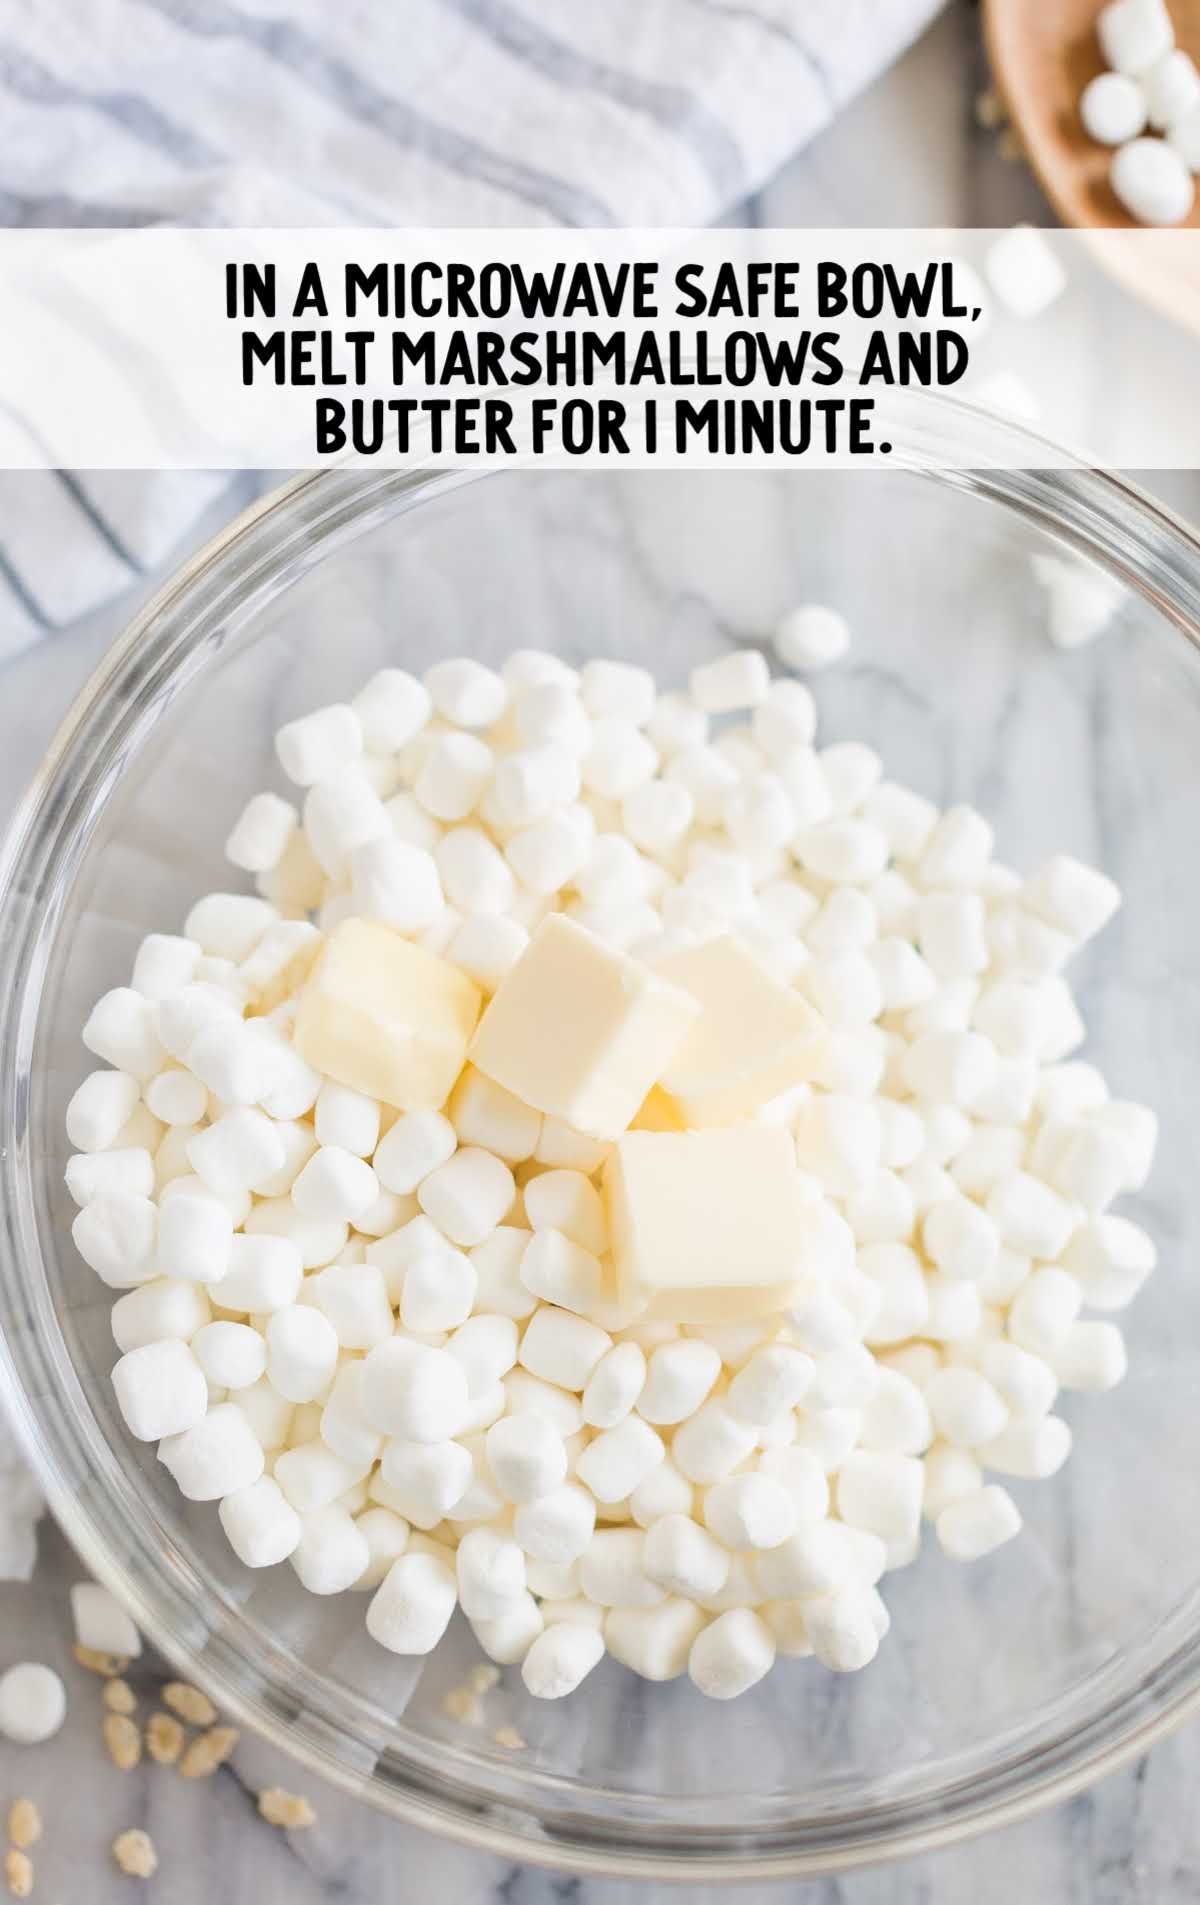 melt marshmallows and butter combined together